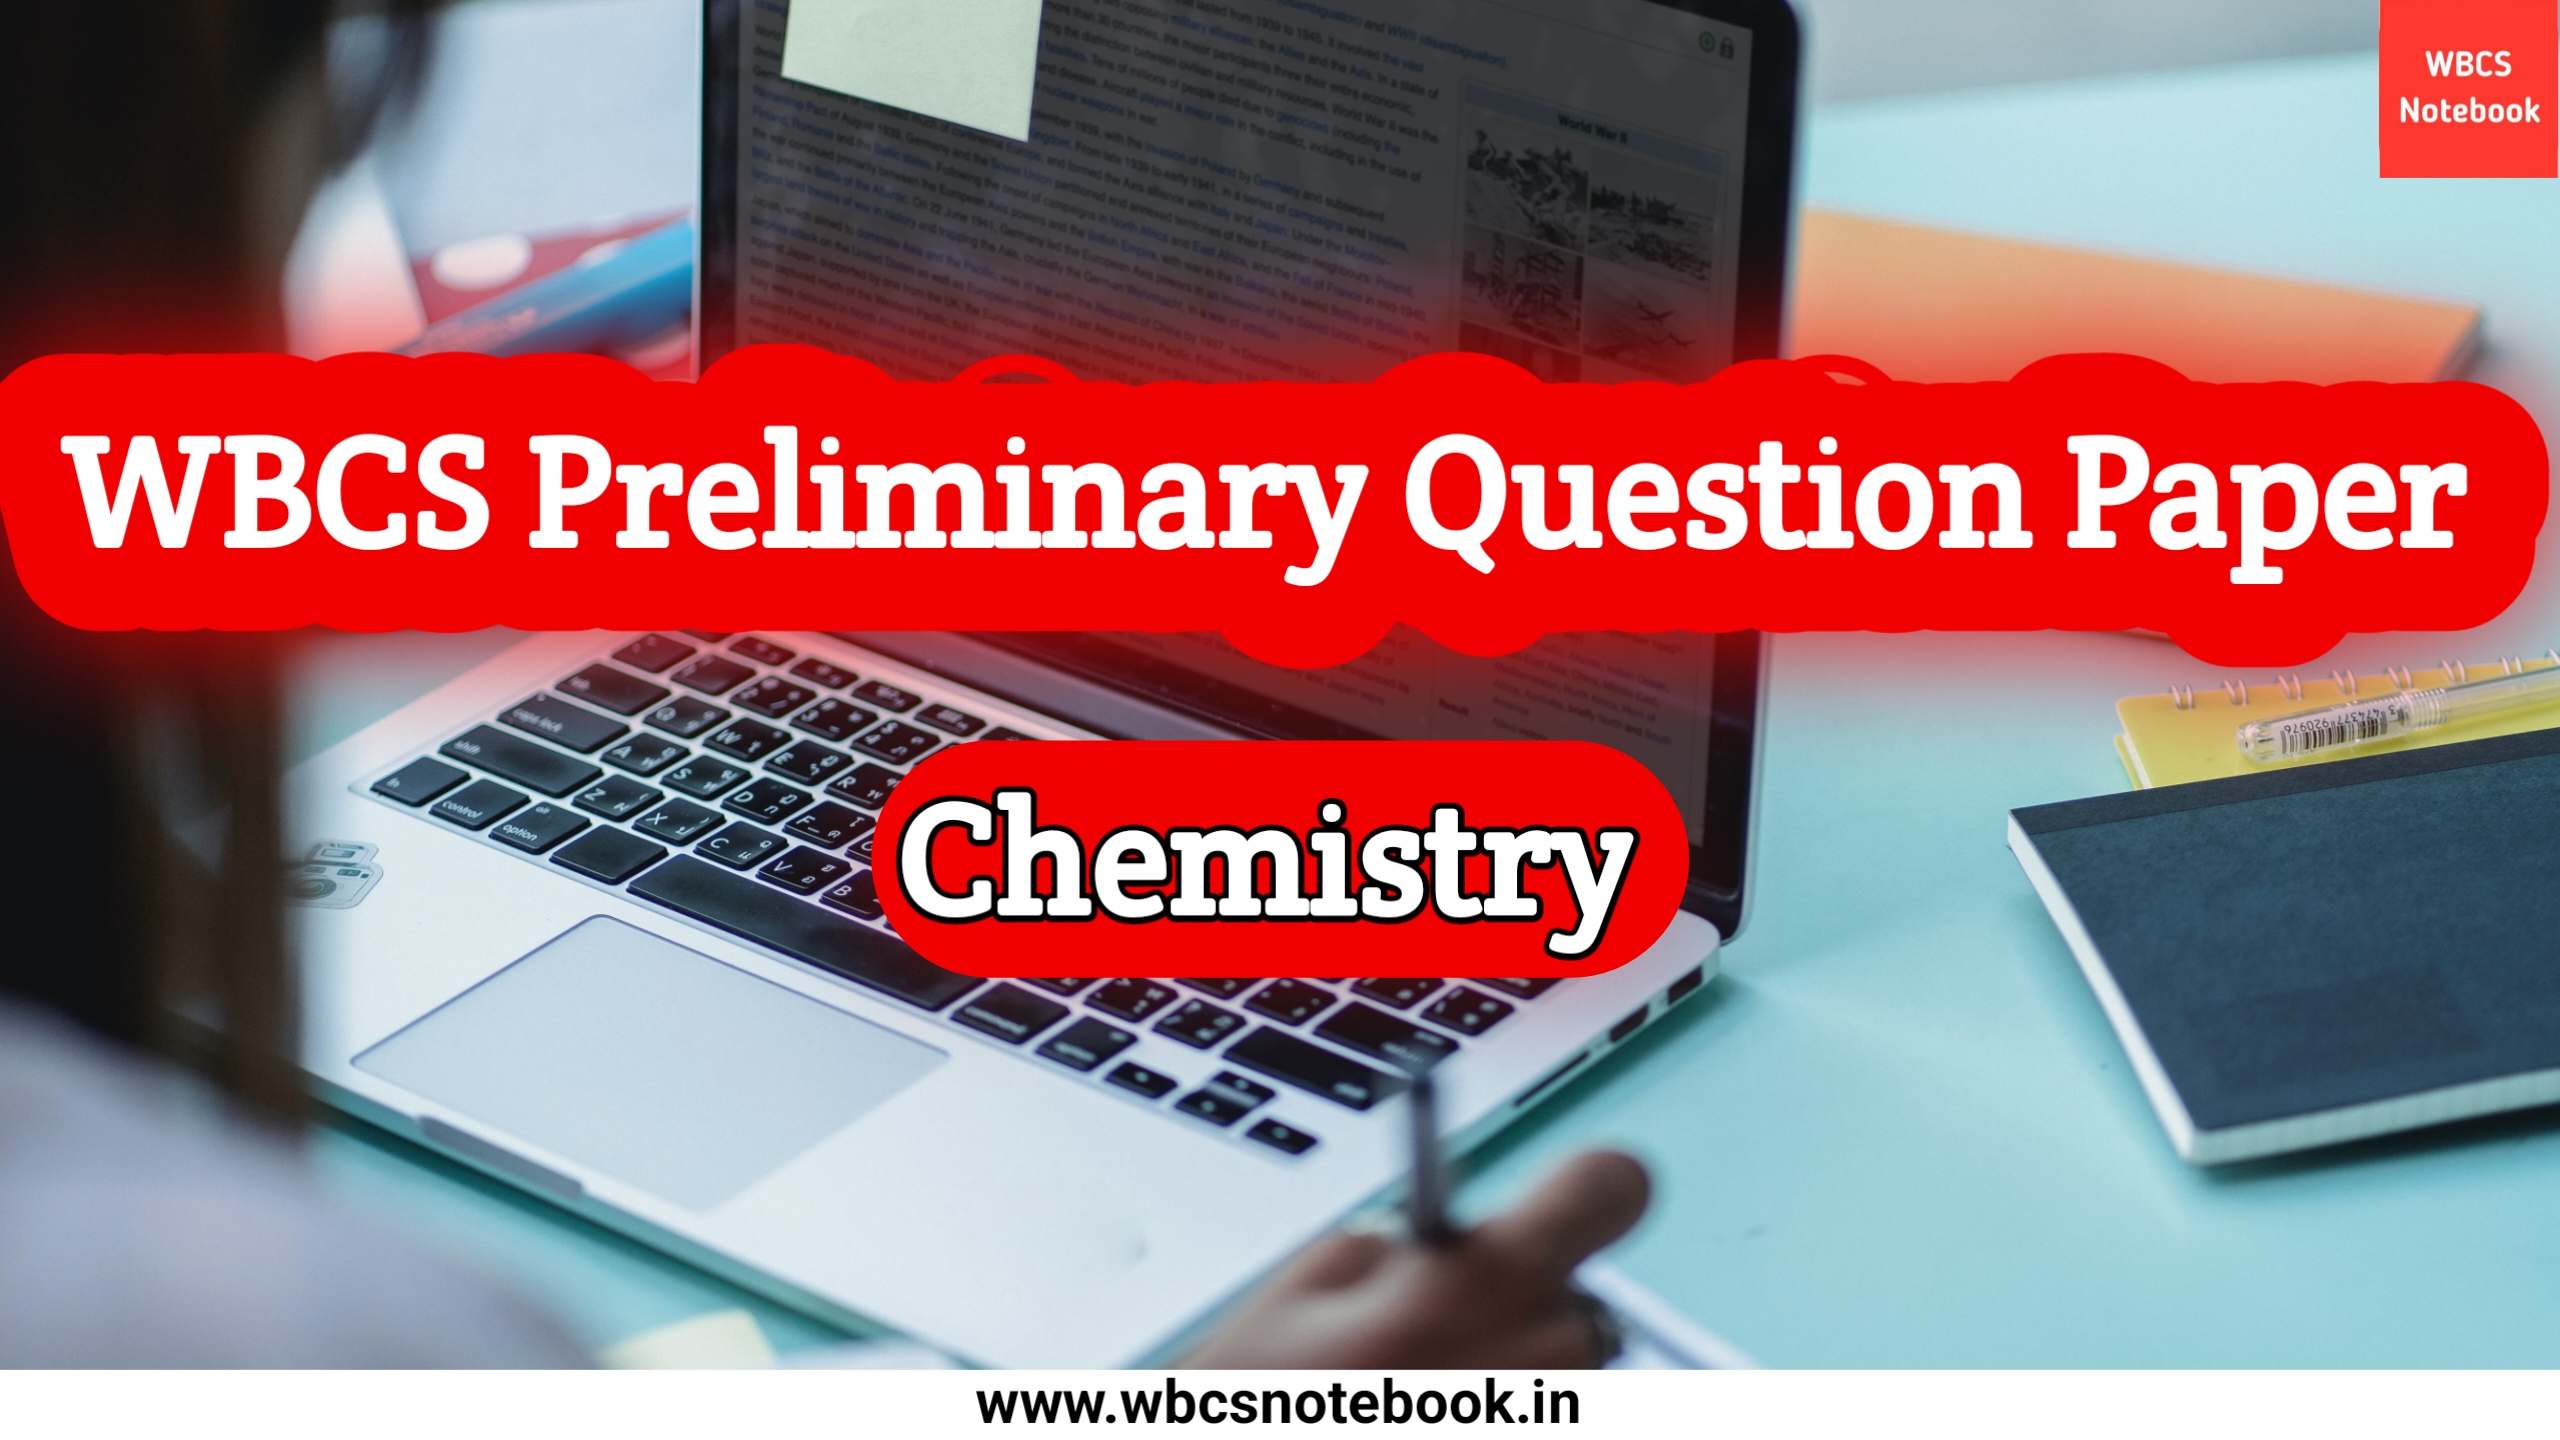 Chemistry - Science - WBCS Preliminary Question Paper - WBCS Notebook